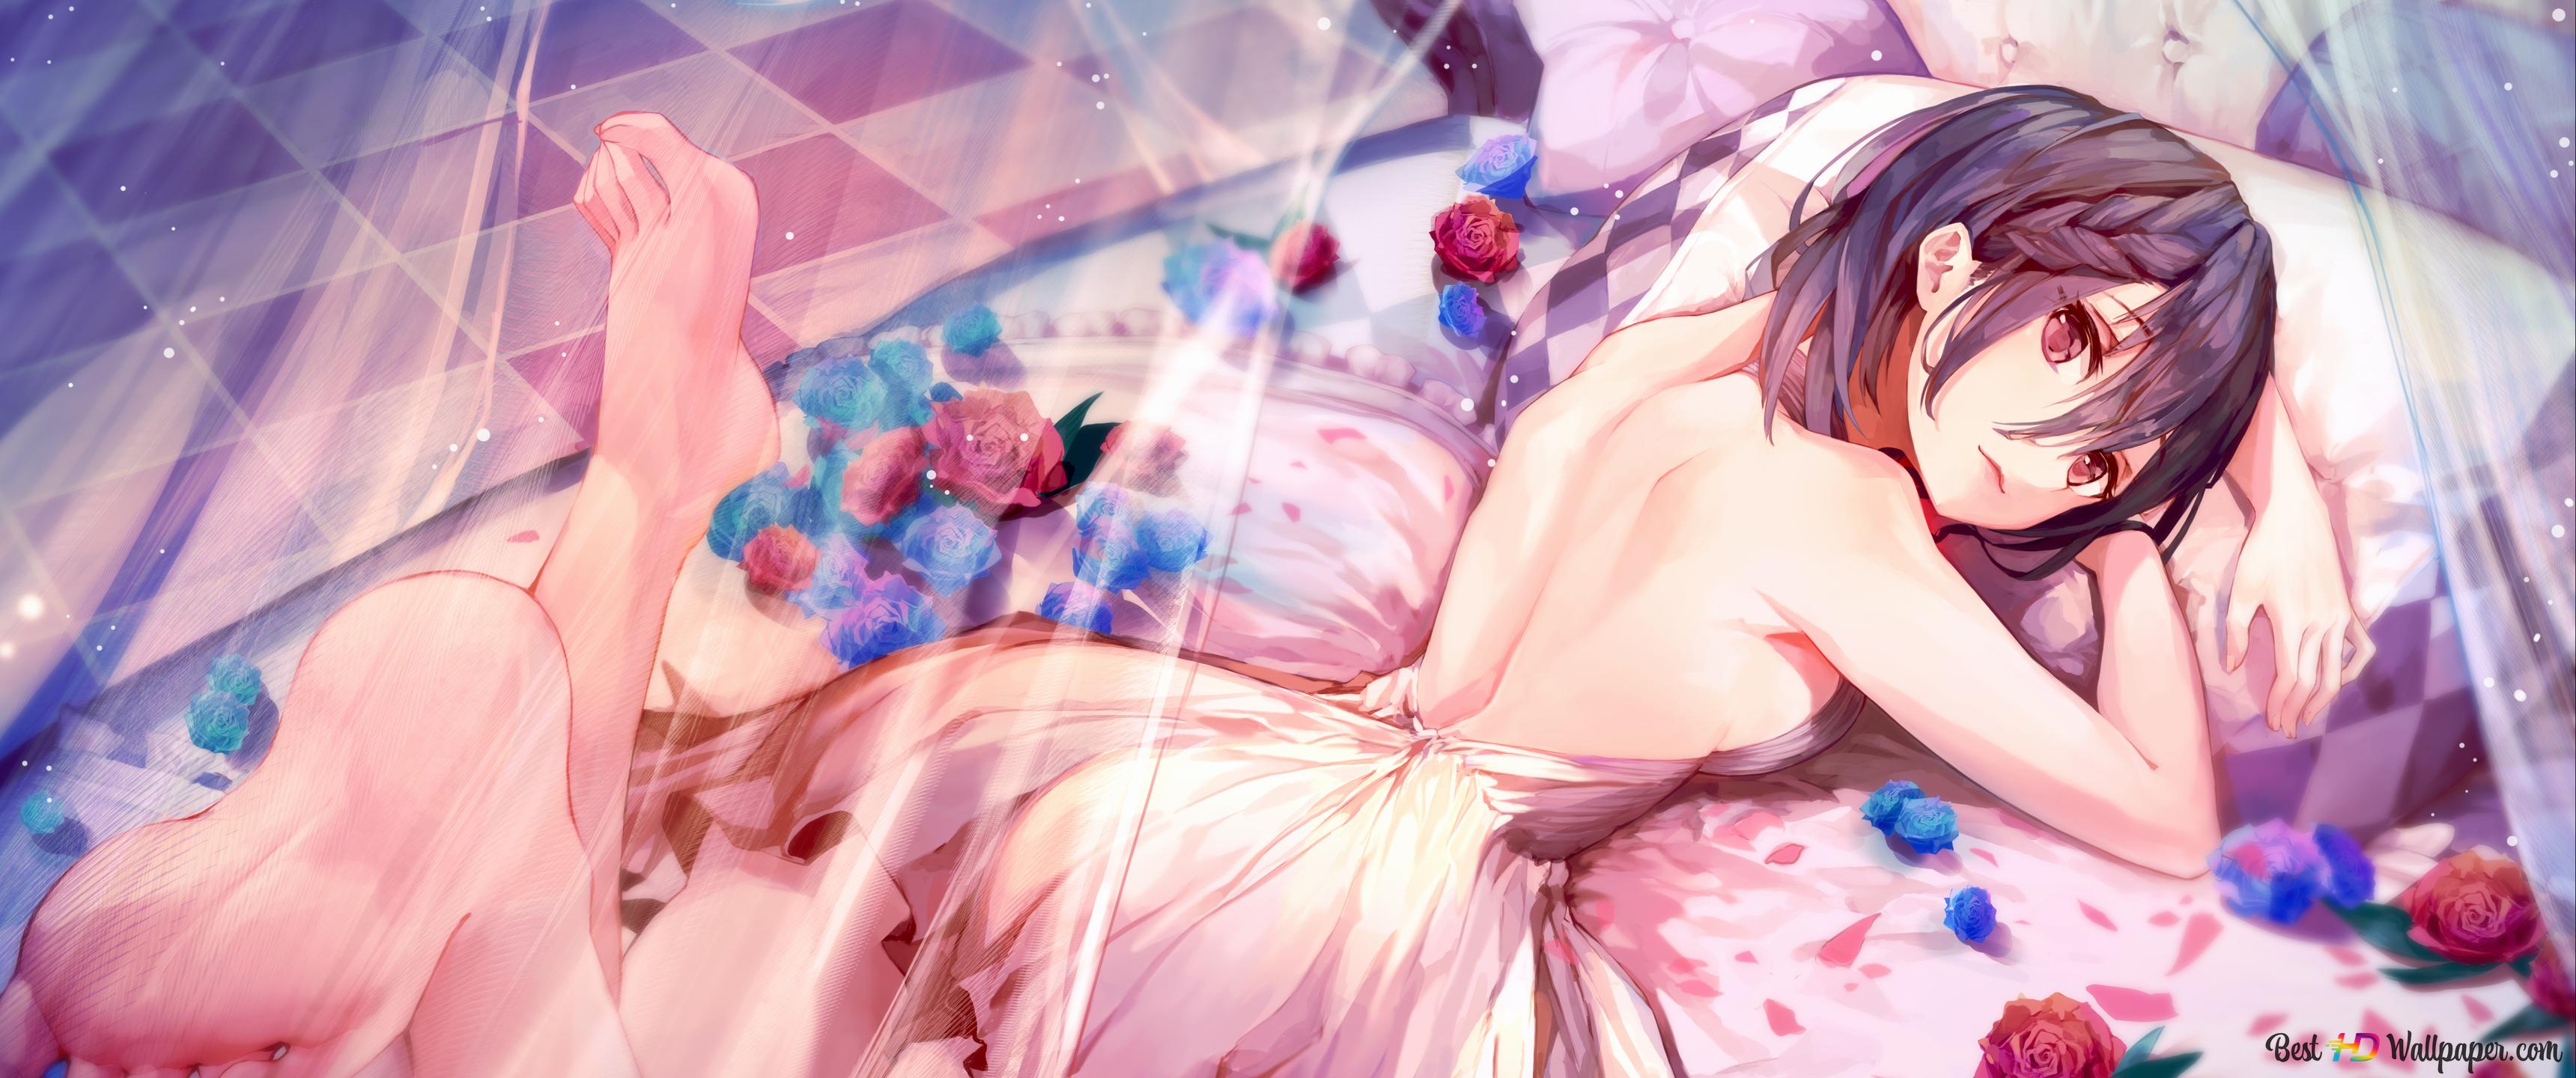 Hot Anime girl lying on her bed with backless pink skirt 4K wallpaper download